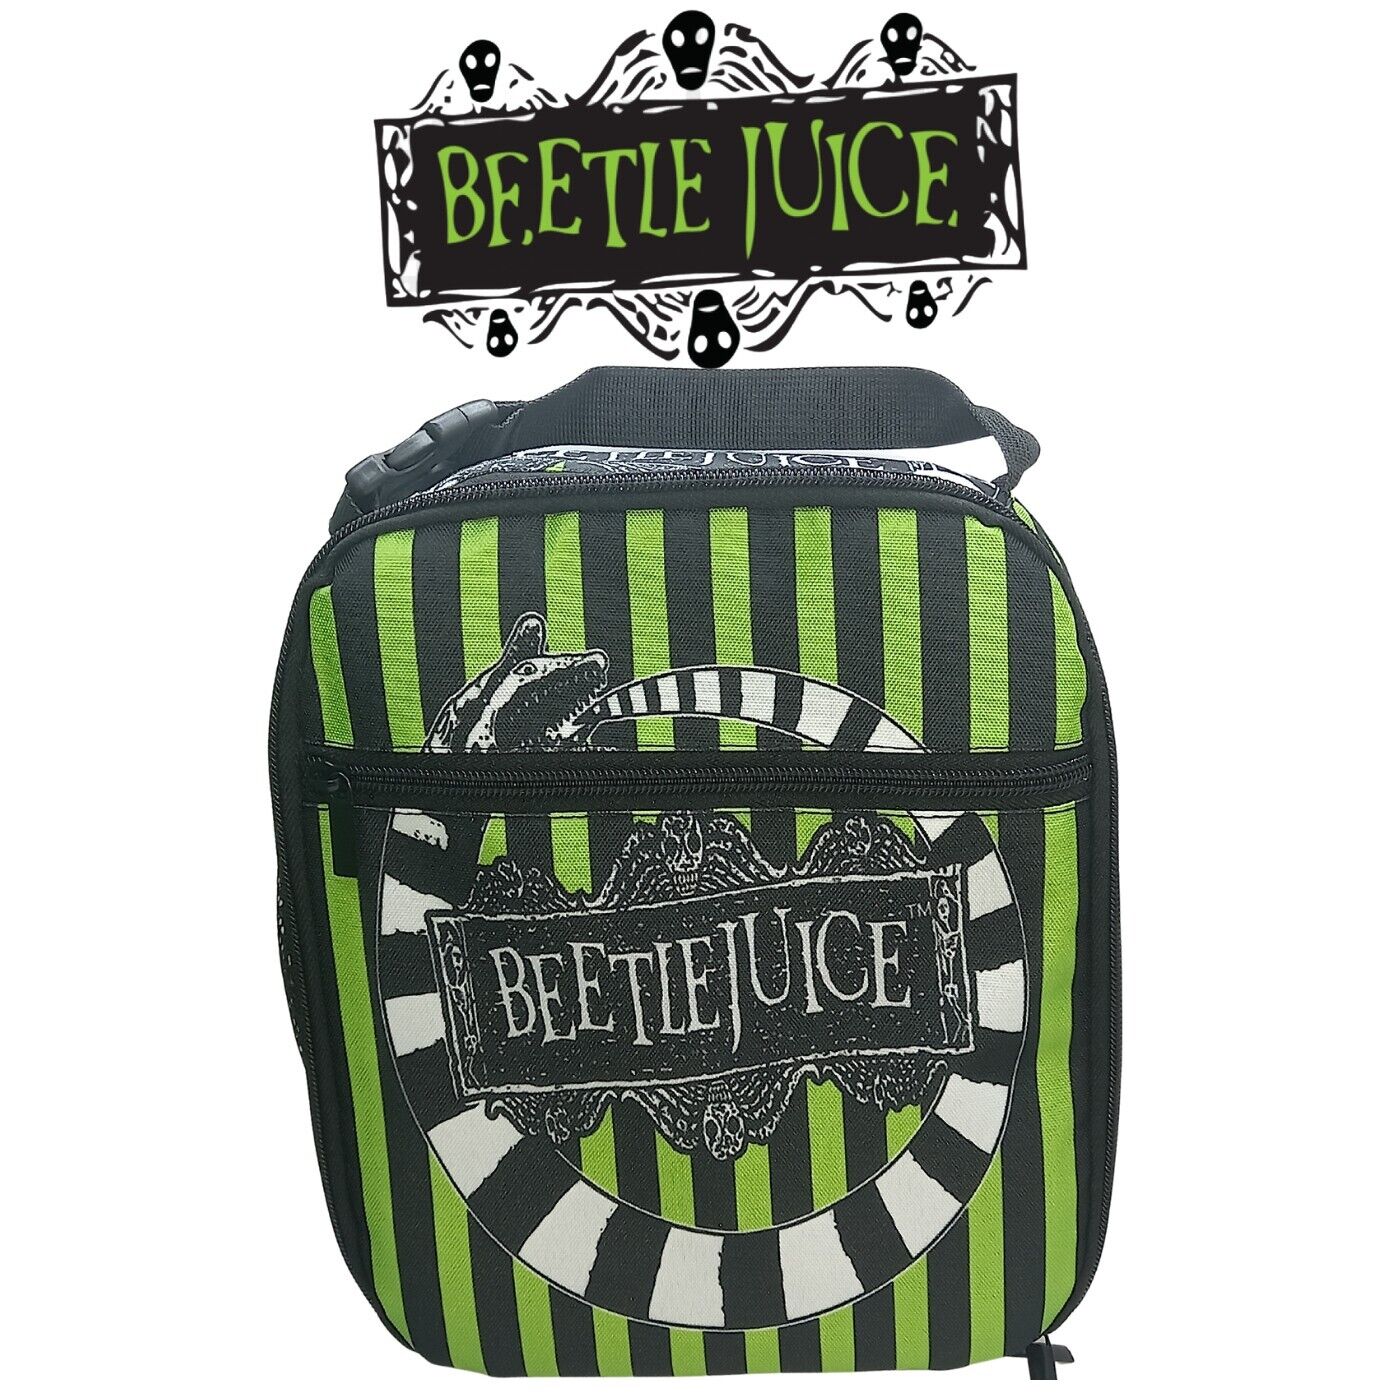 Beetlejuice Insulated Lunch Bag